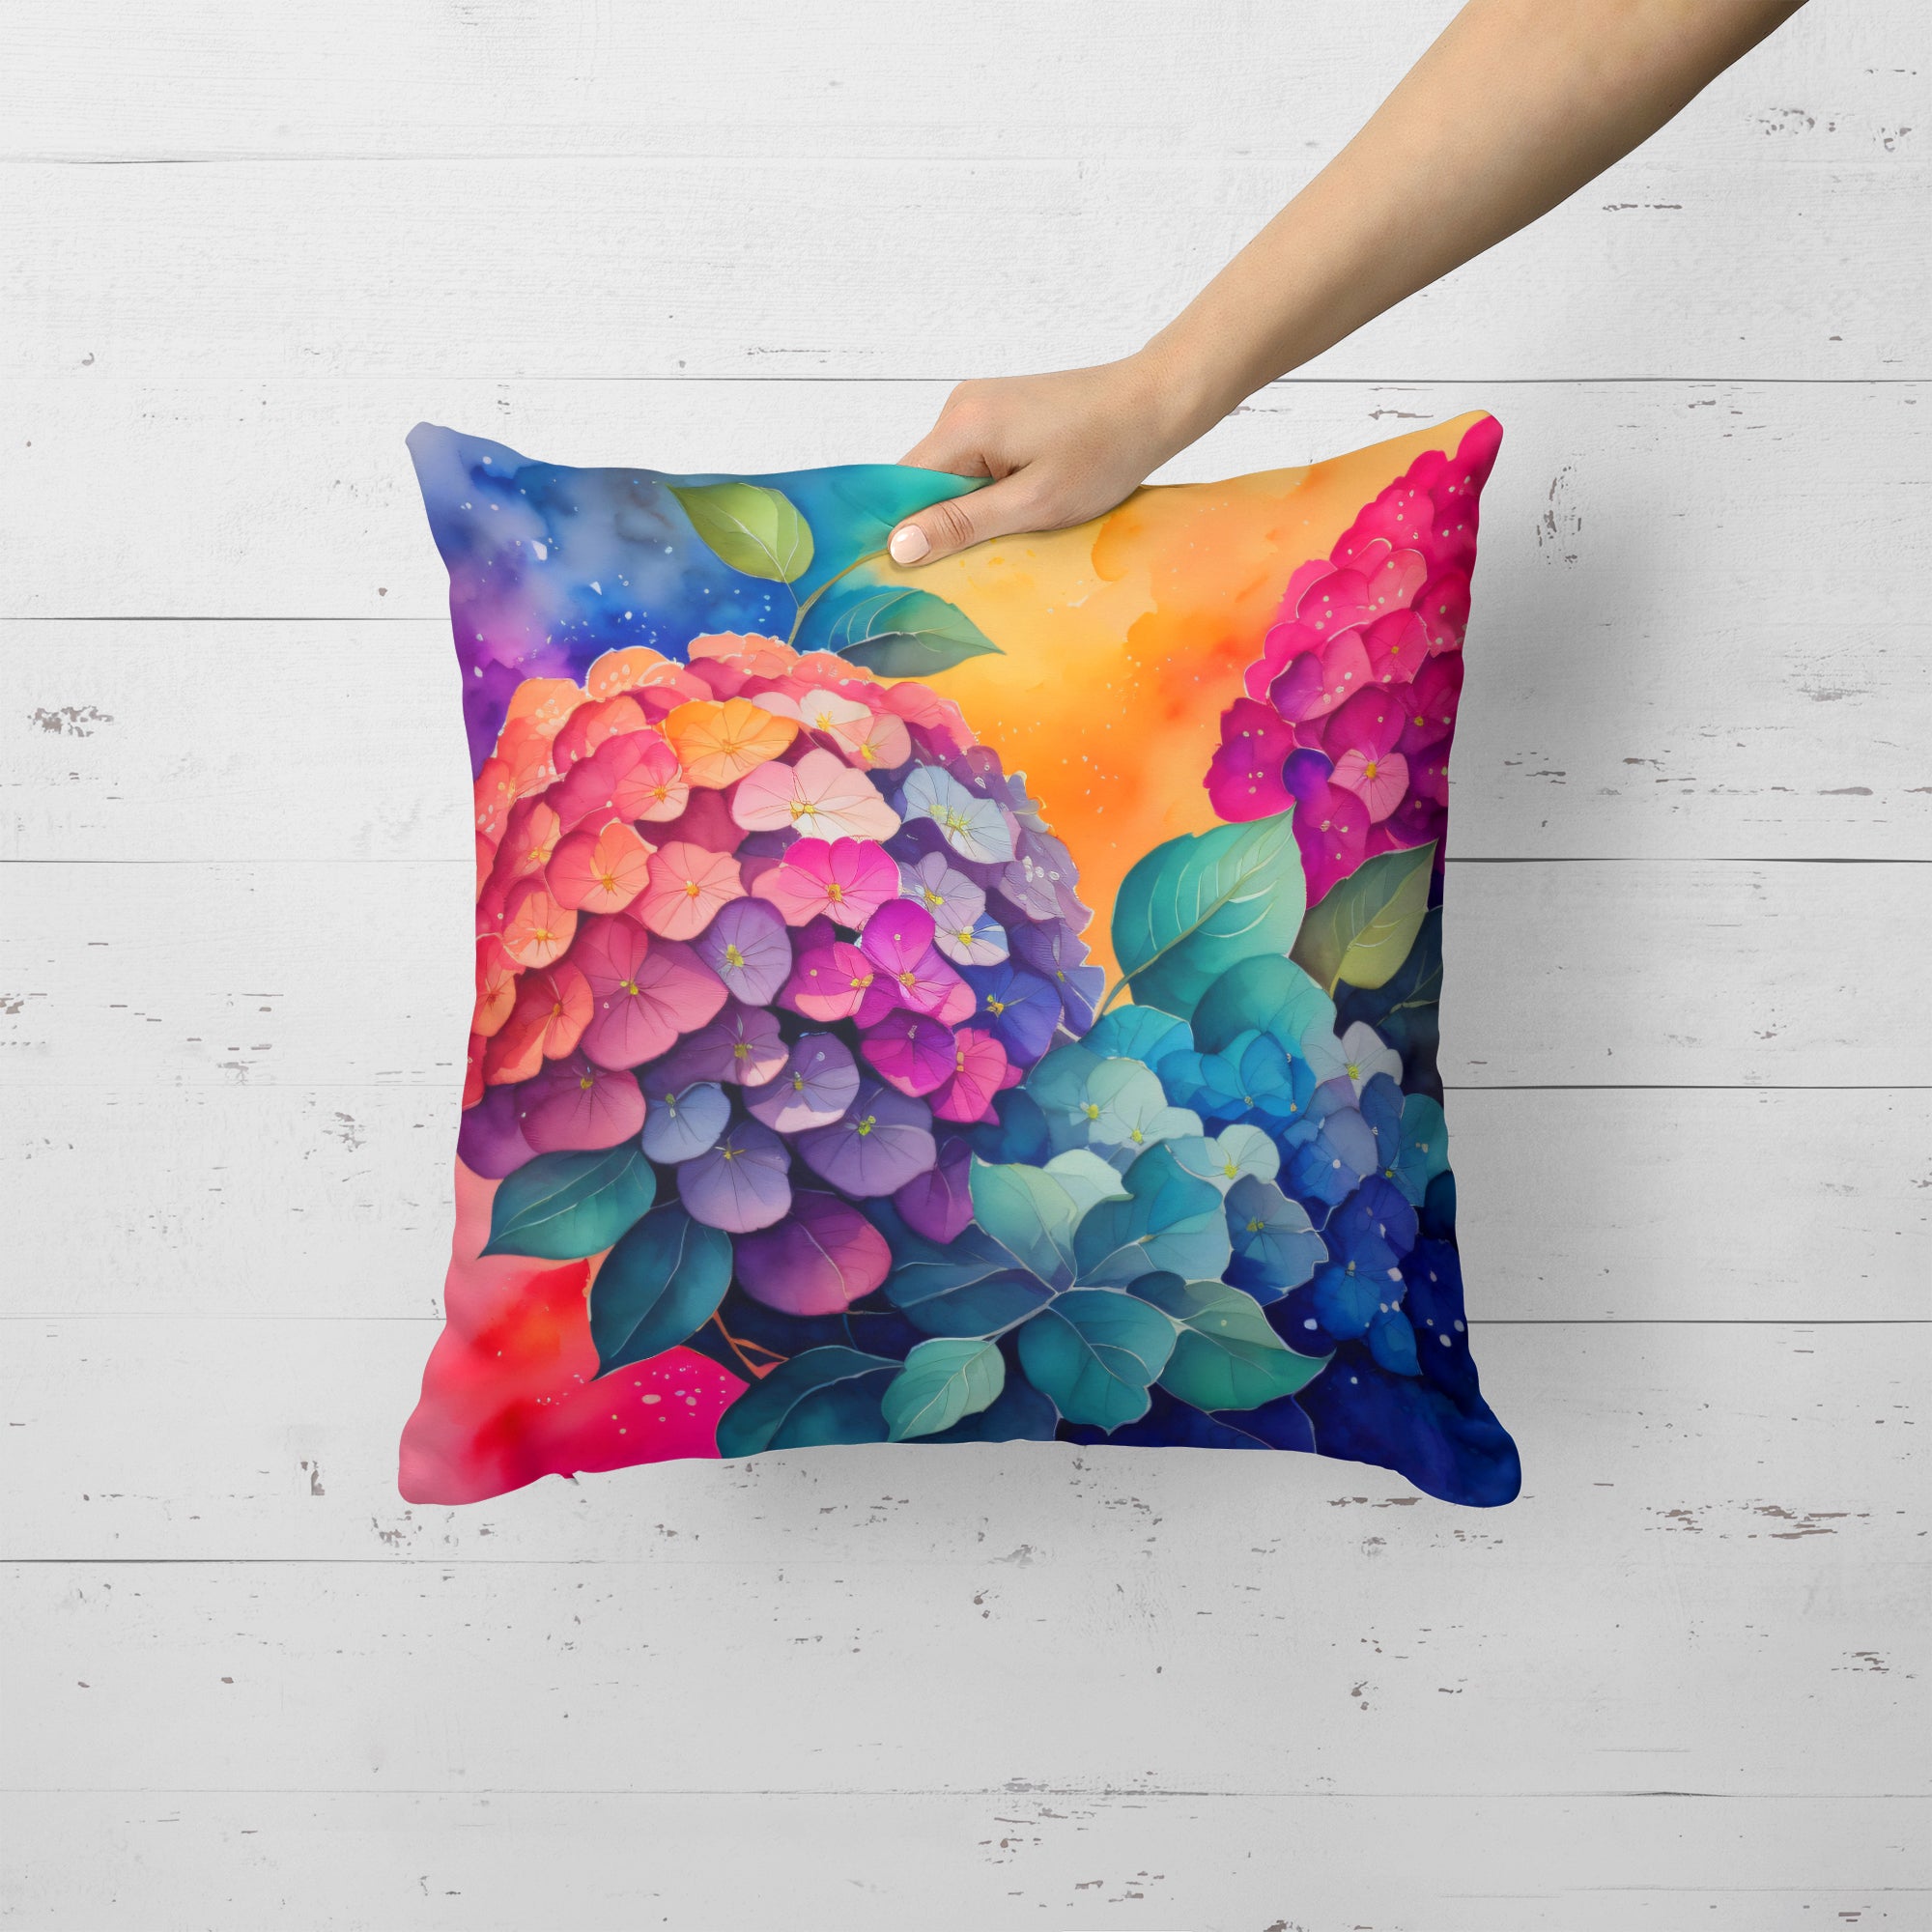 Buy this Colorful Hydrangeas Fabric Decorative Pillow